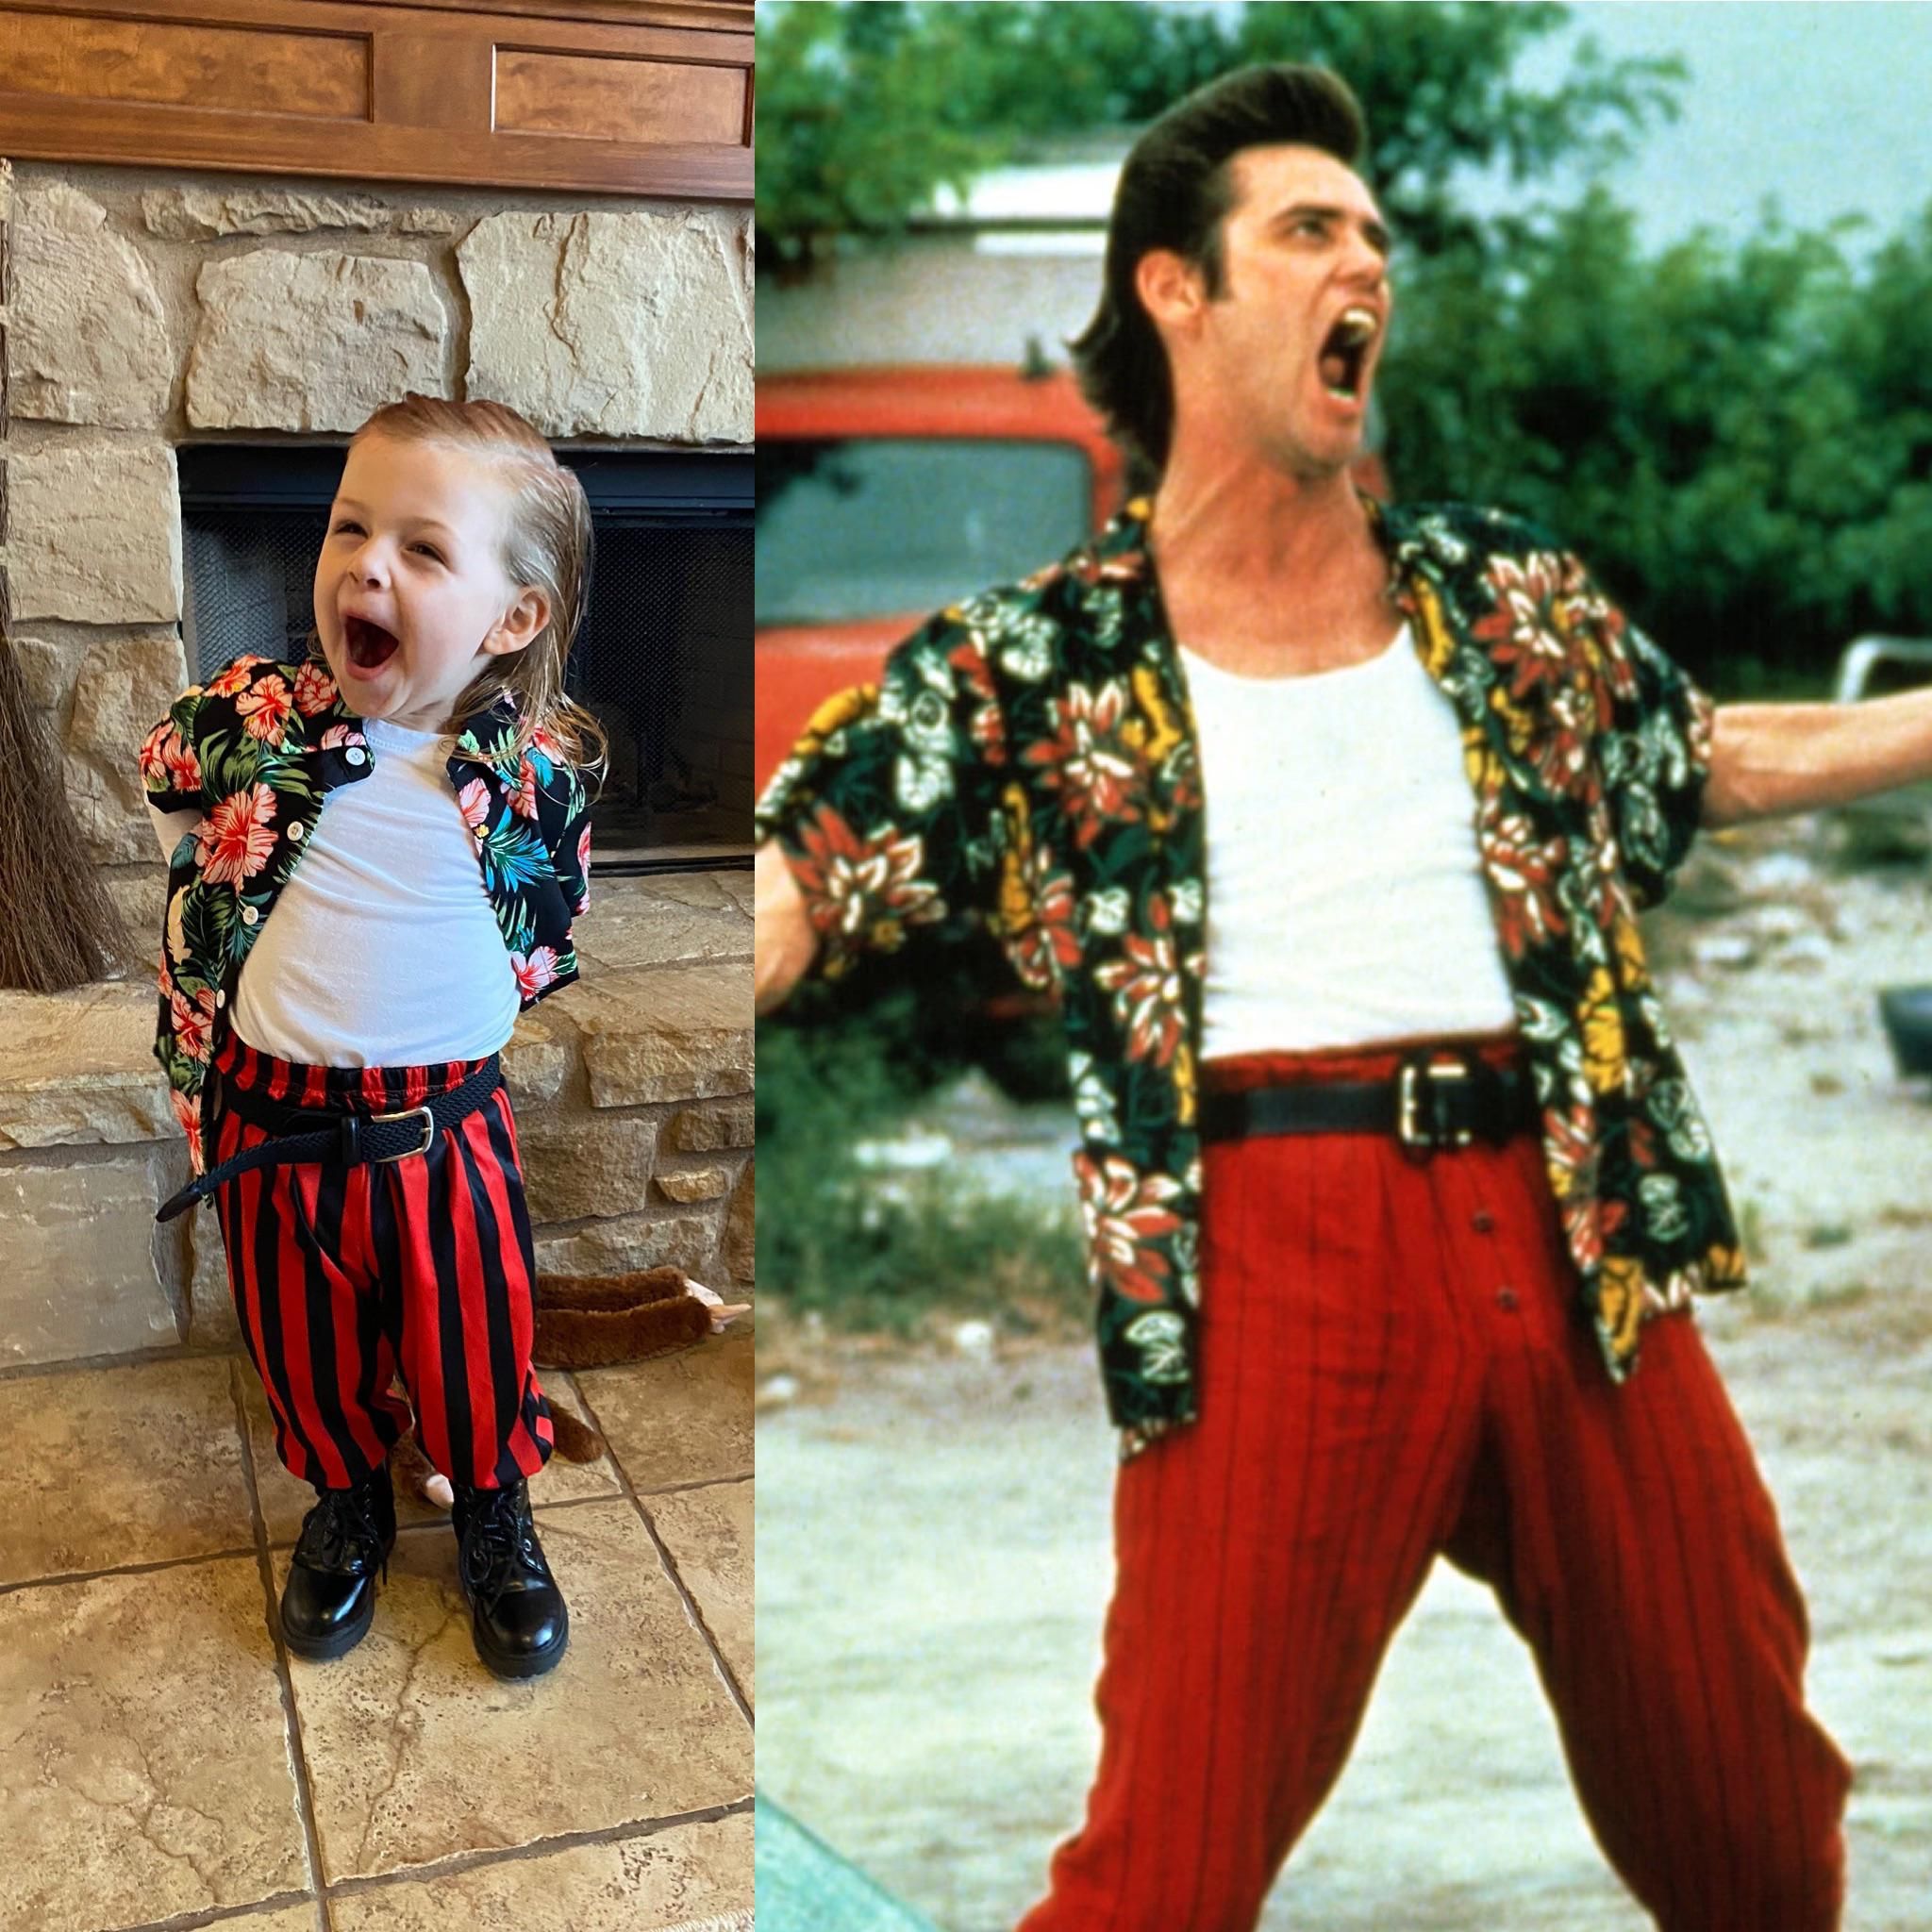 Ace Ventura!!! My daughter really got into character this Halloween lol how’d we do??